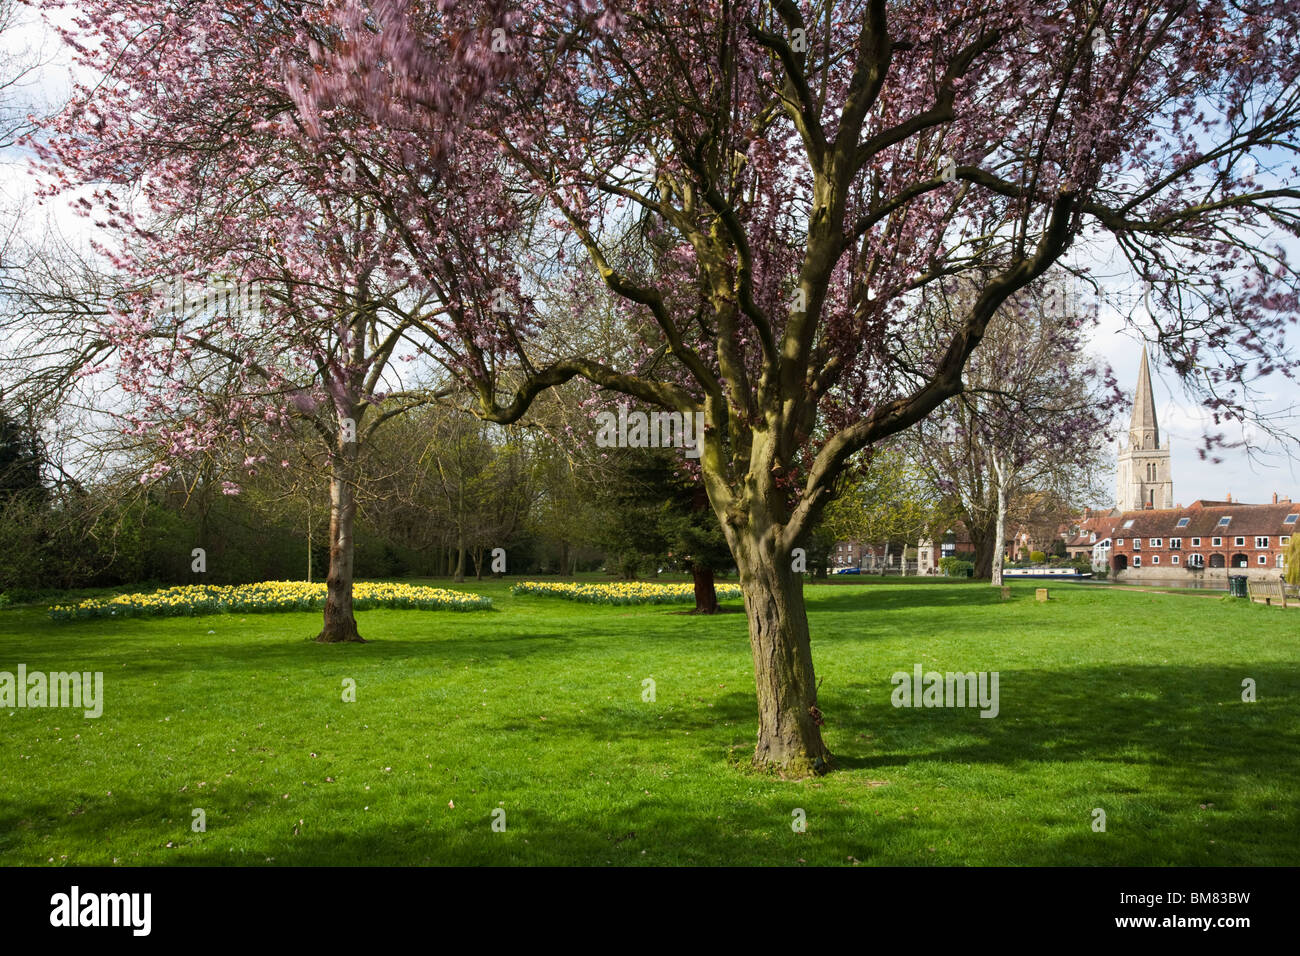 Daffodils and cherry blossom on the banks of the River Thames in Abingdon, Oxfordshire, Uk Stock Photo